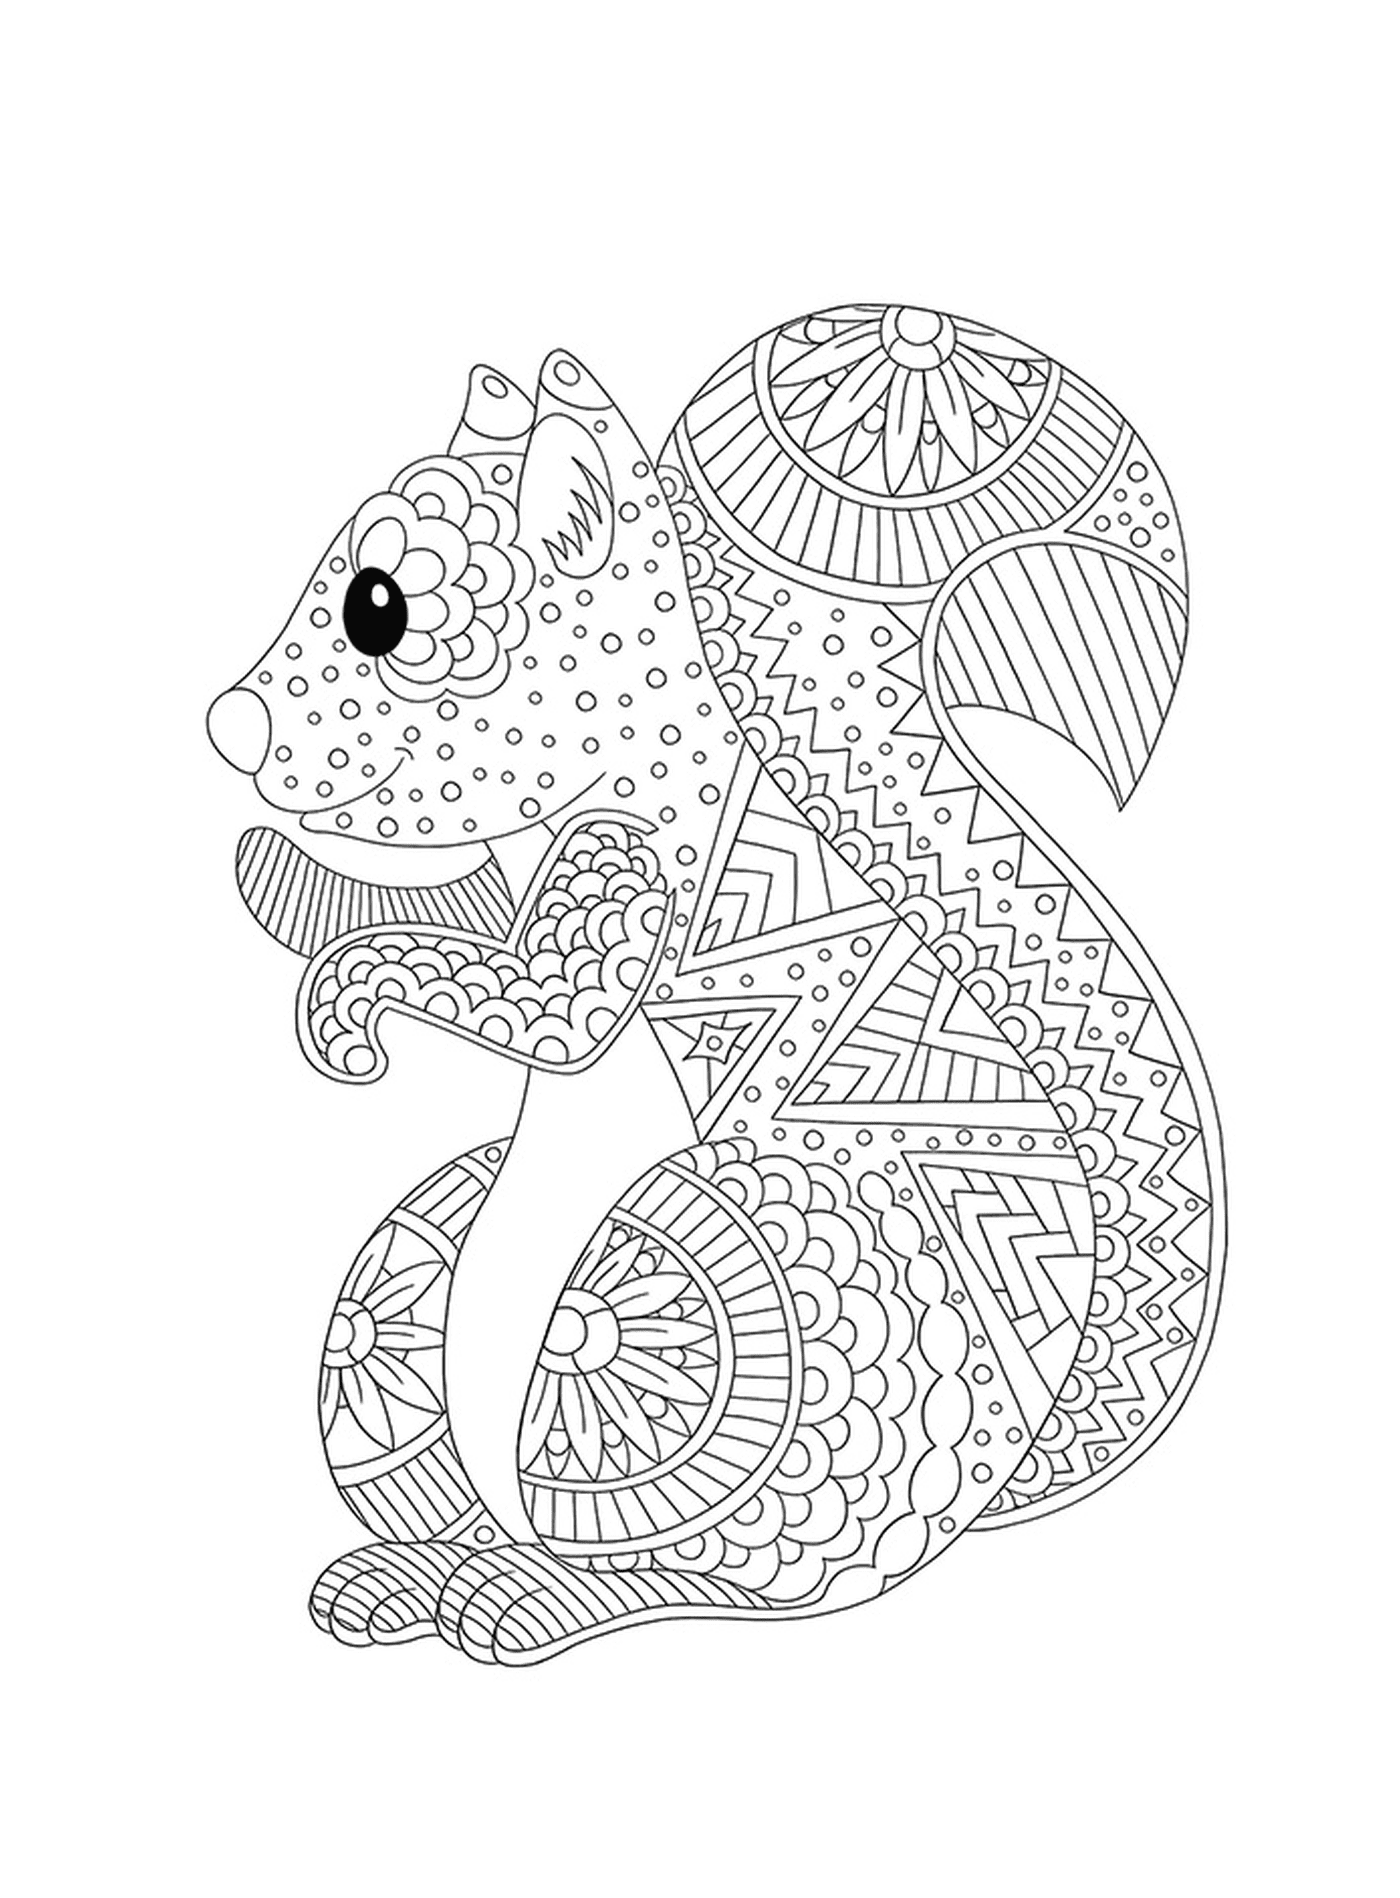  Squirrel with a decorative pattern in Canada 